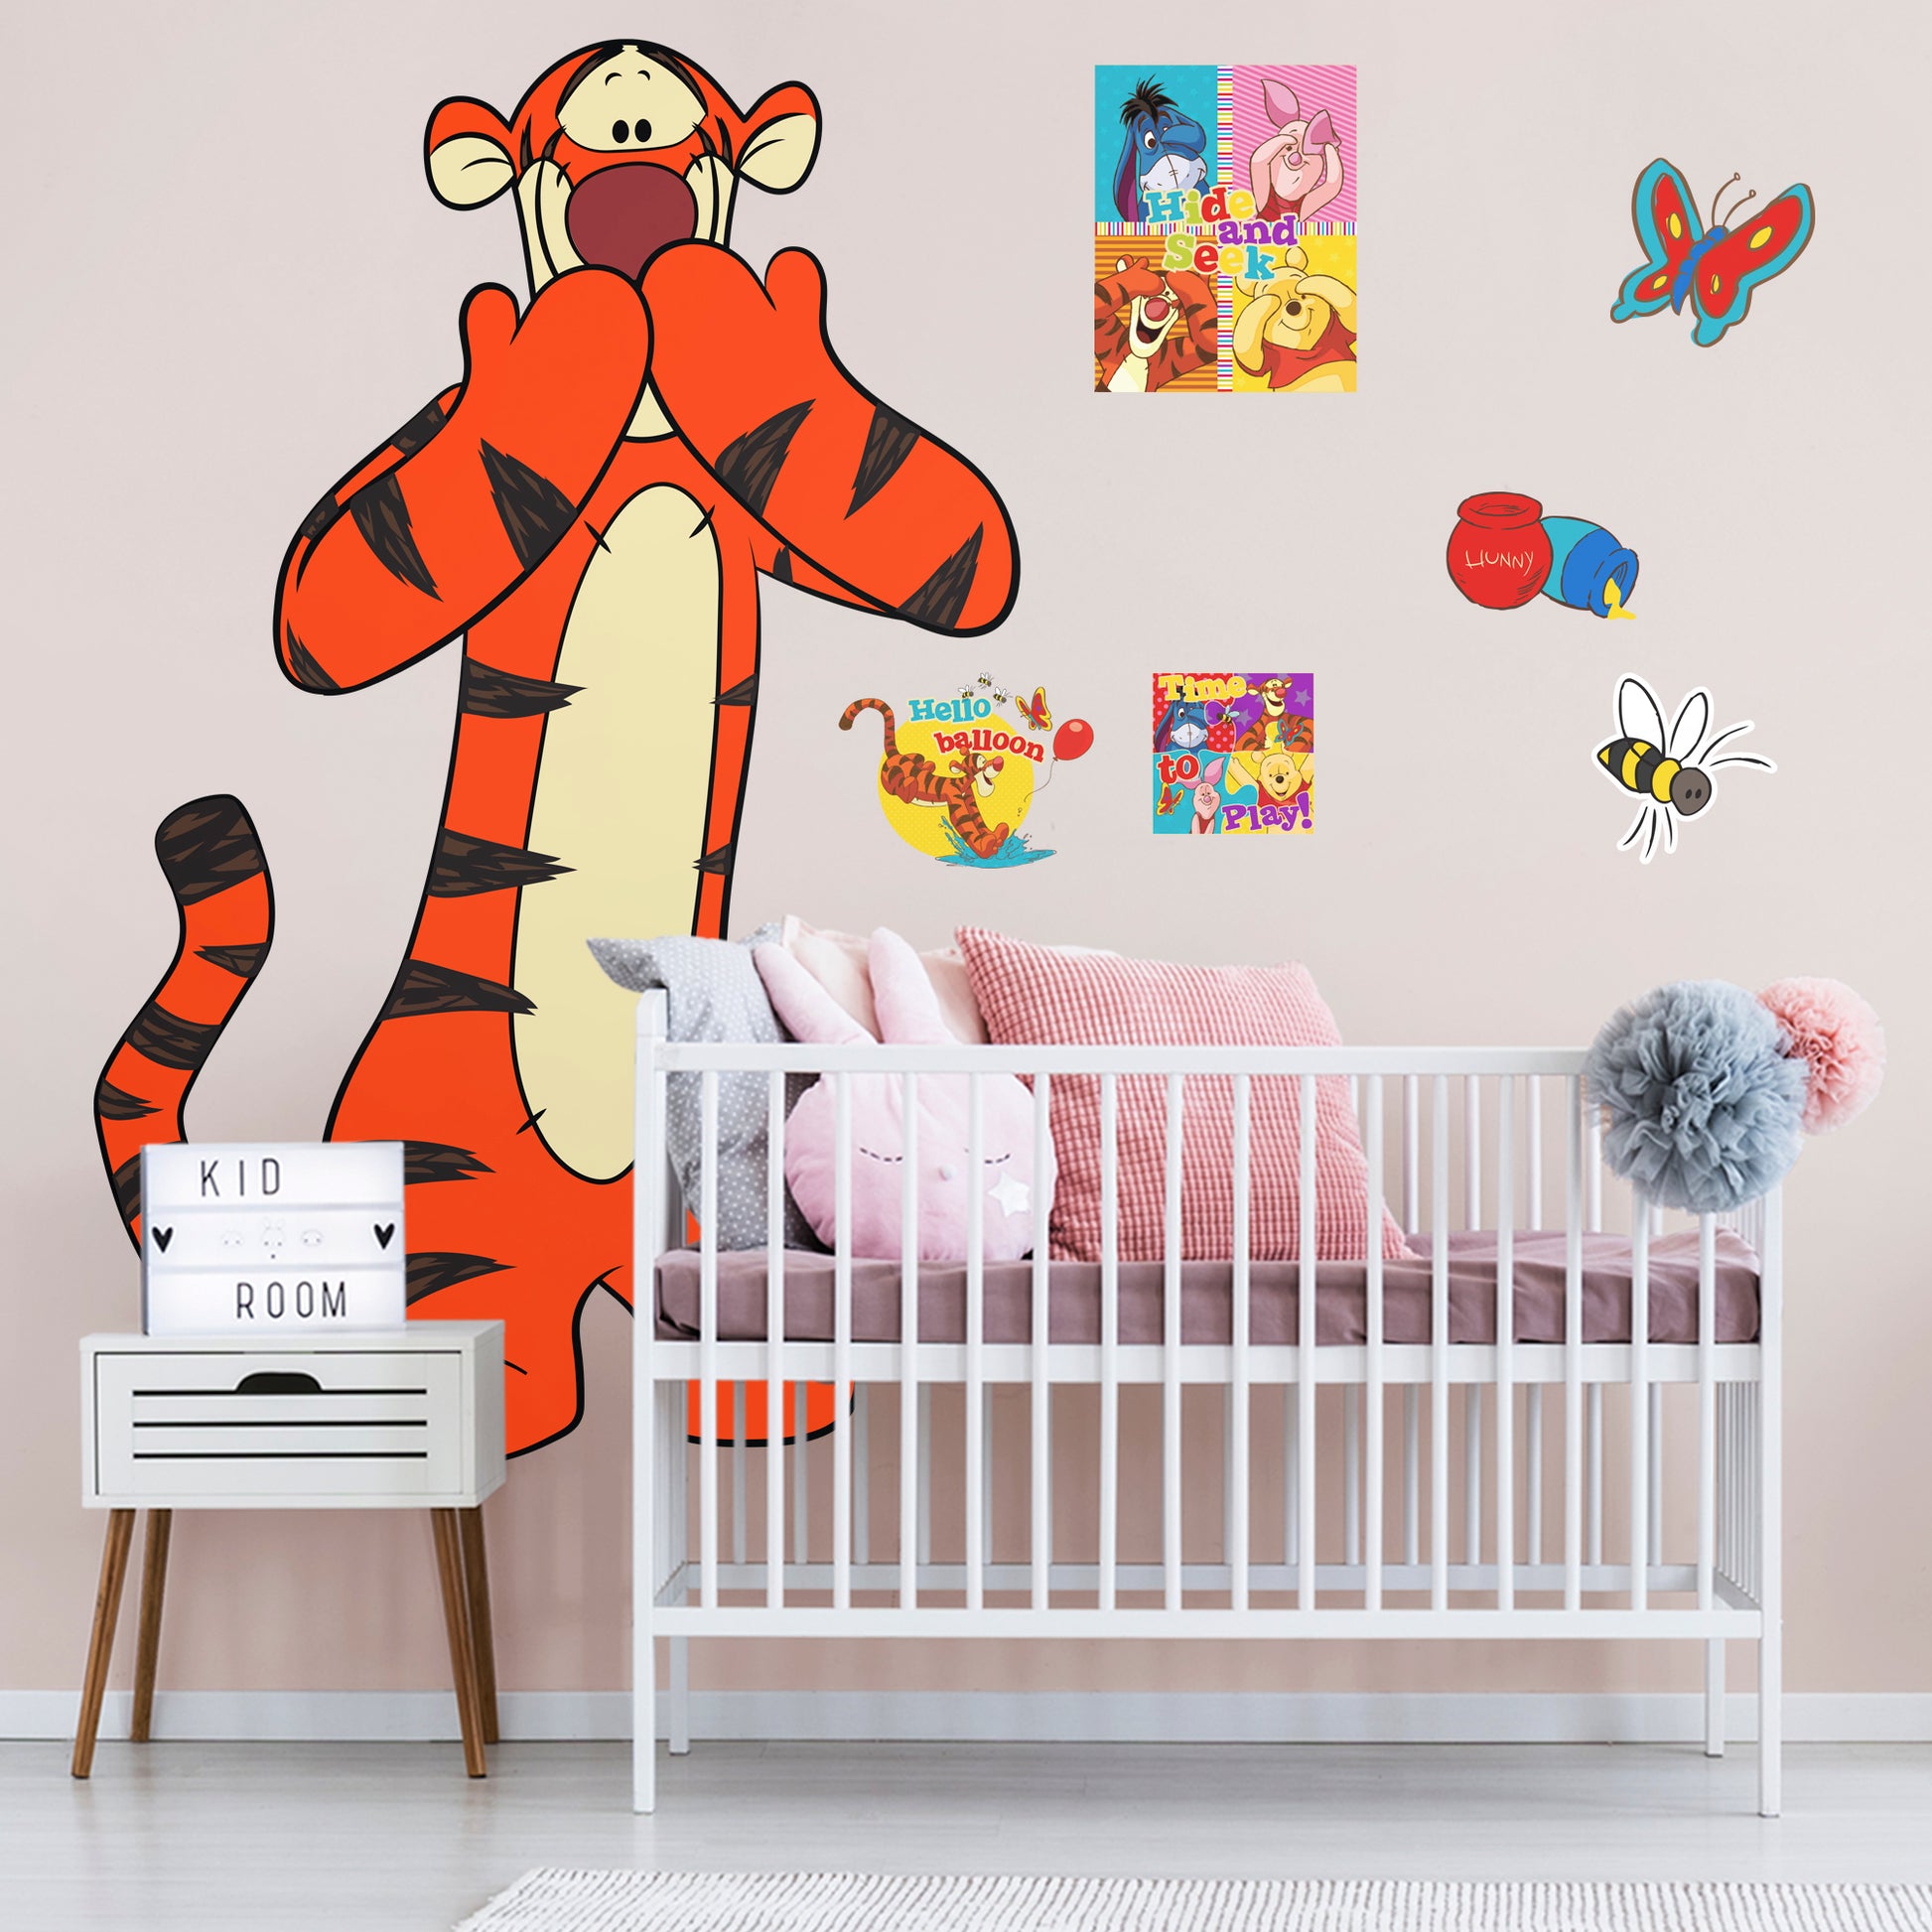 Life-Size Character +7 Decals  (60"W x 36"H)